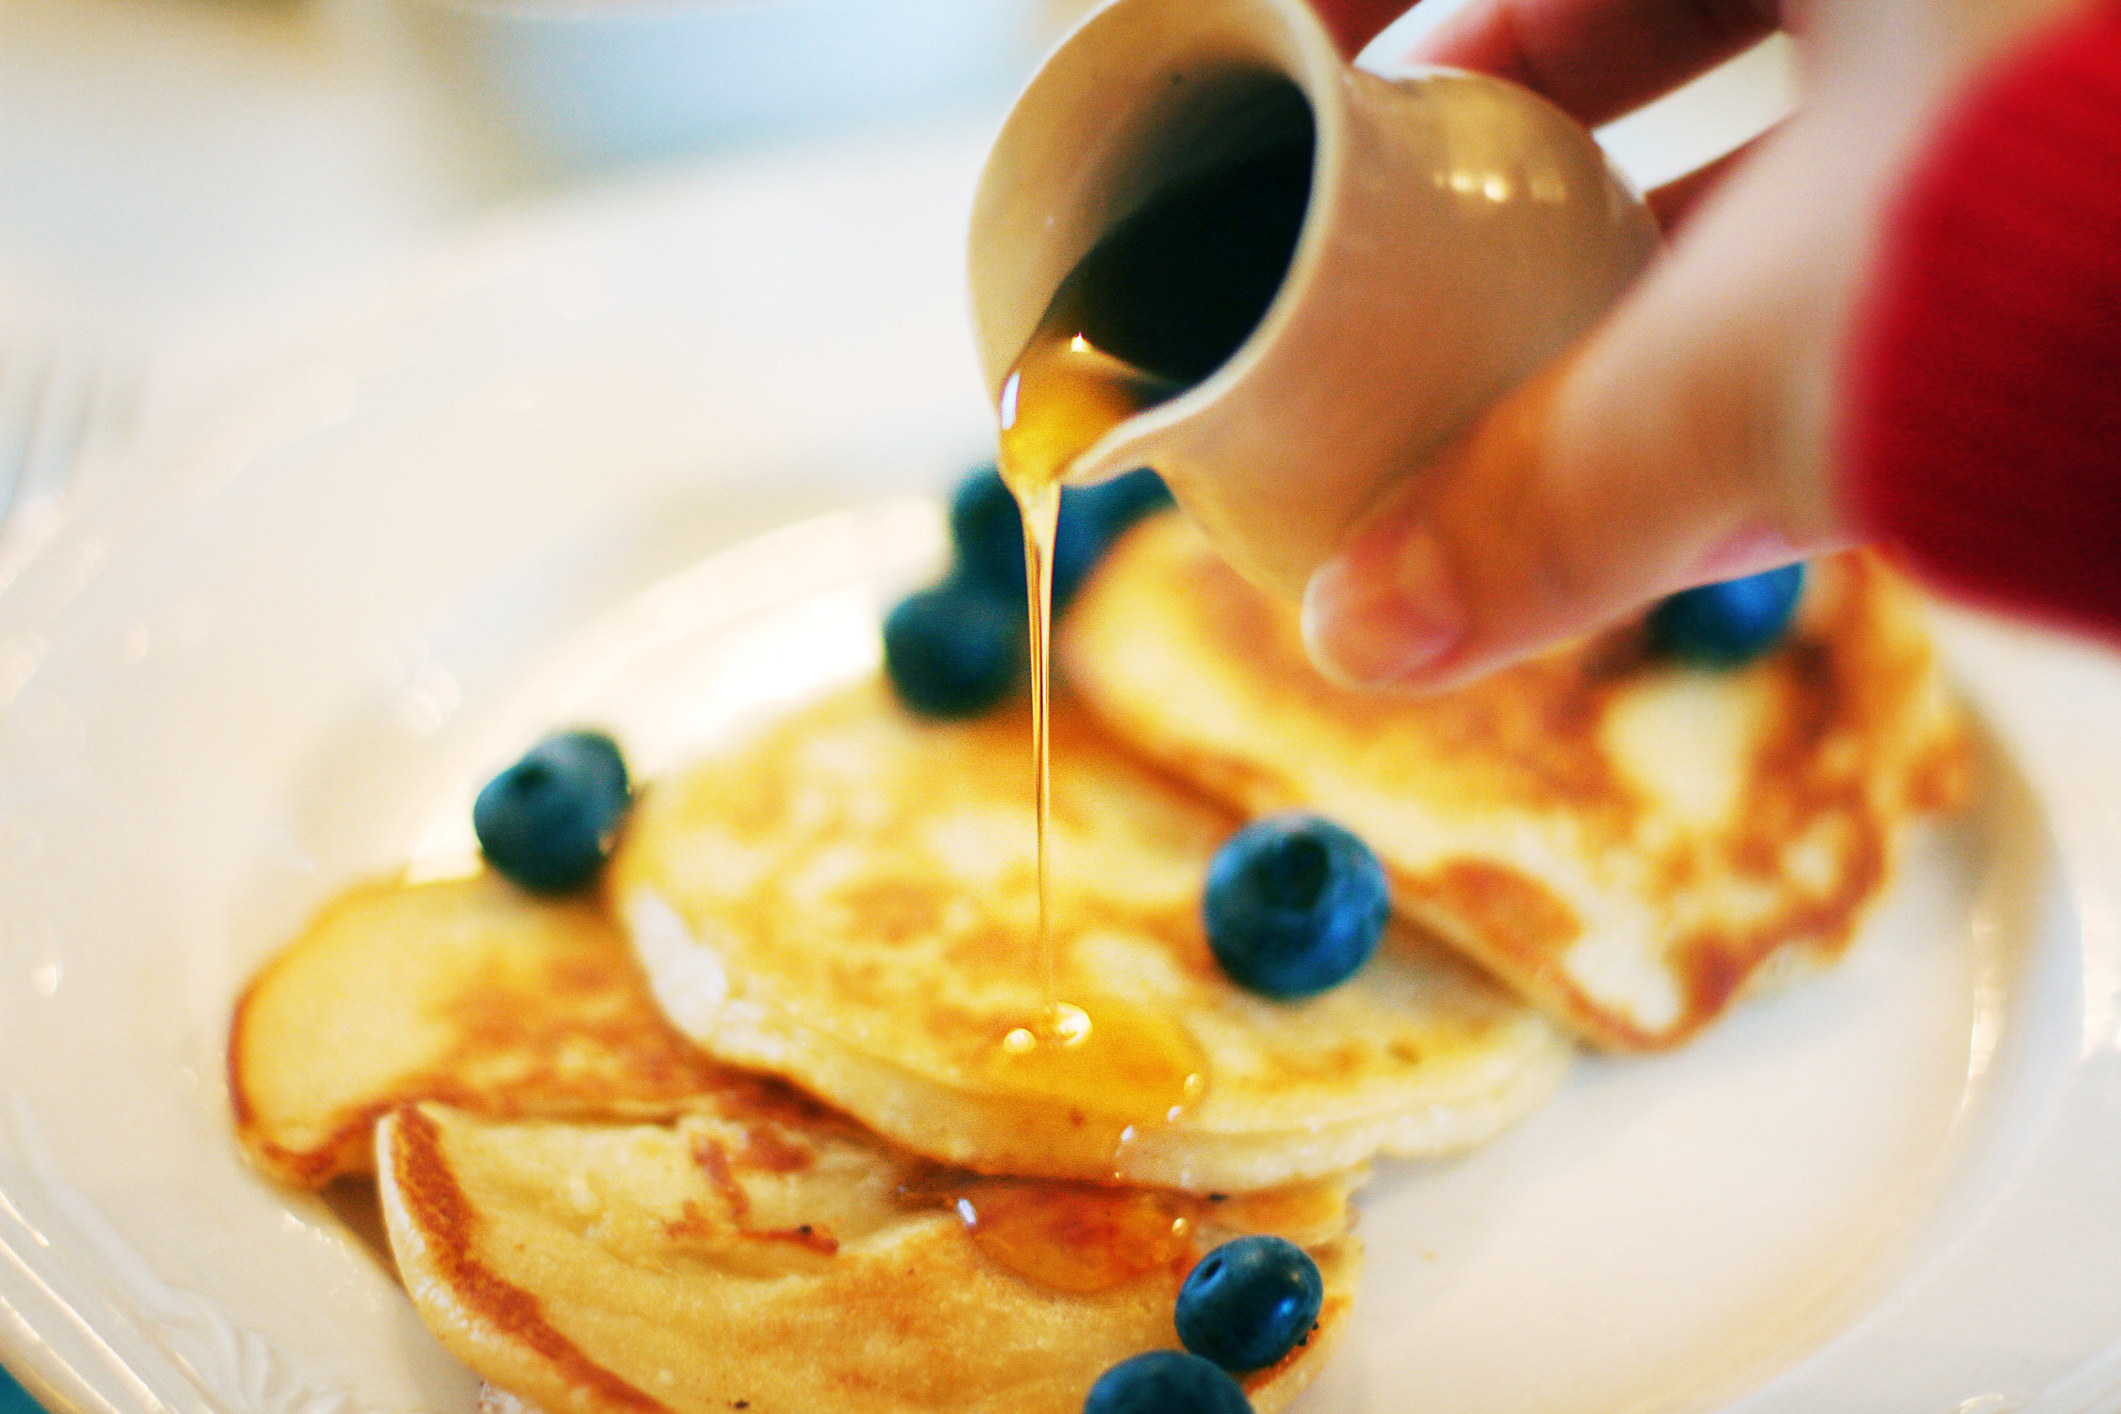 Pouring syrup onto pancakes